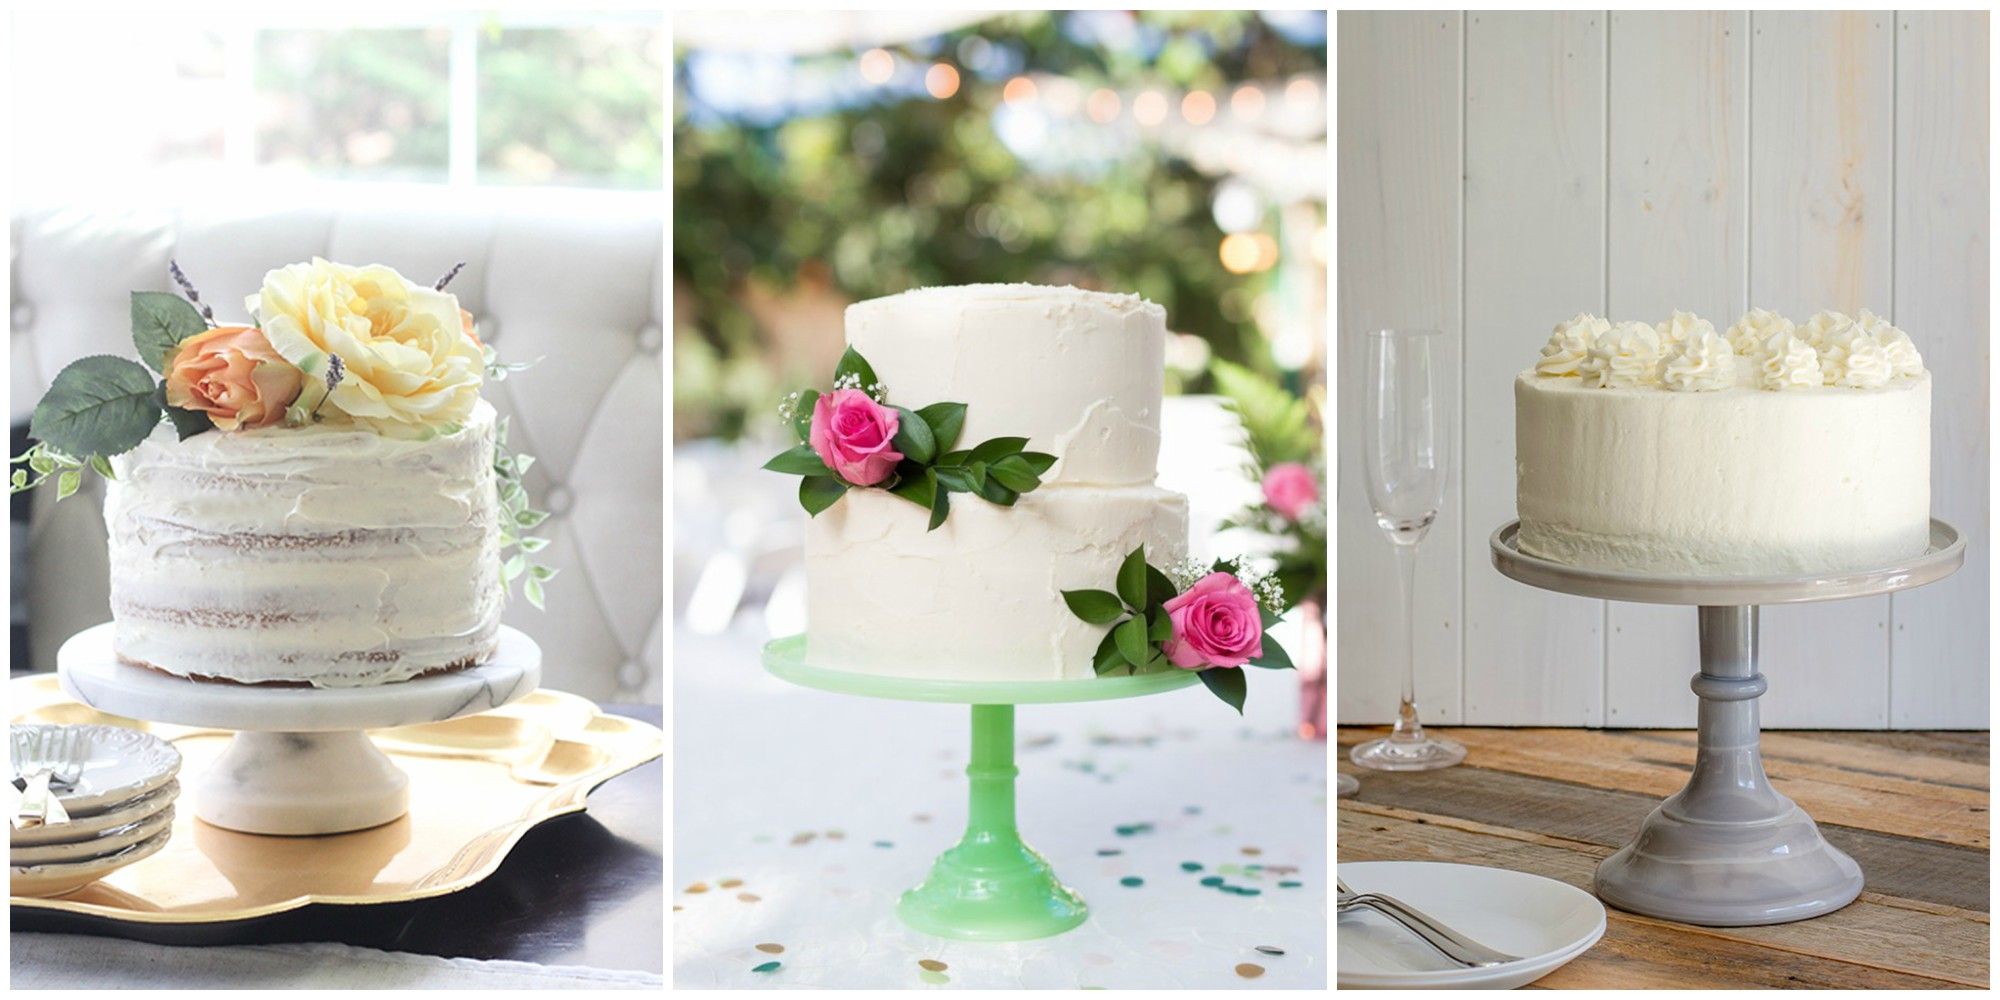 How To Find The Best Wedding Cake In New York